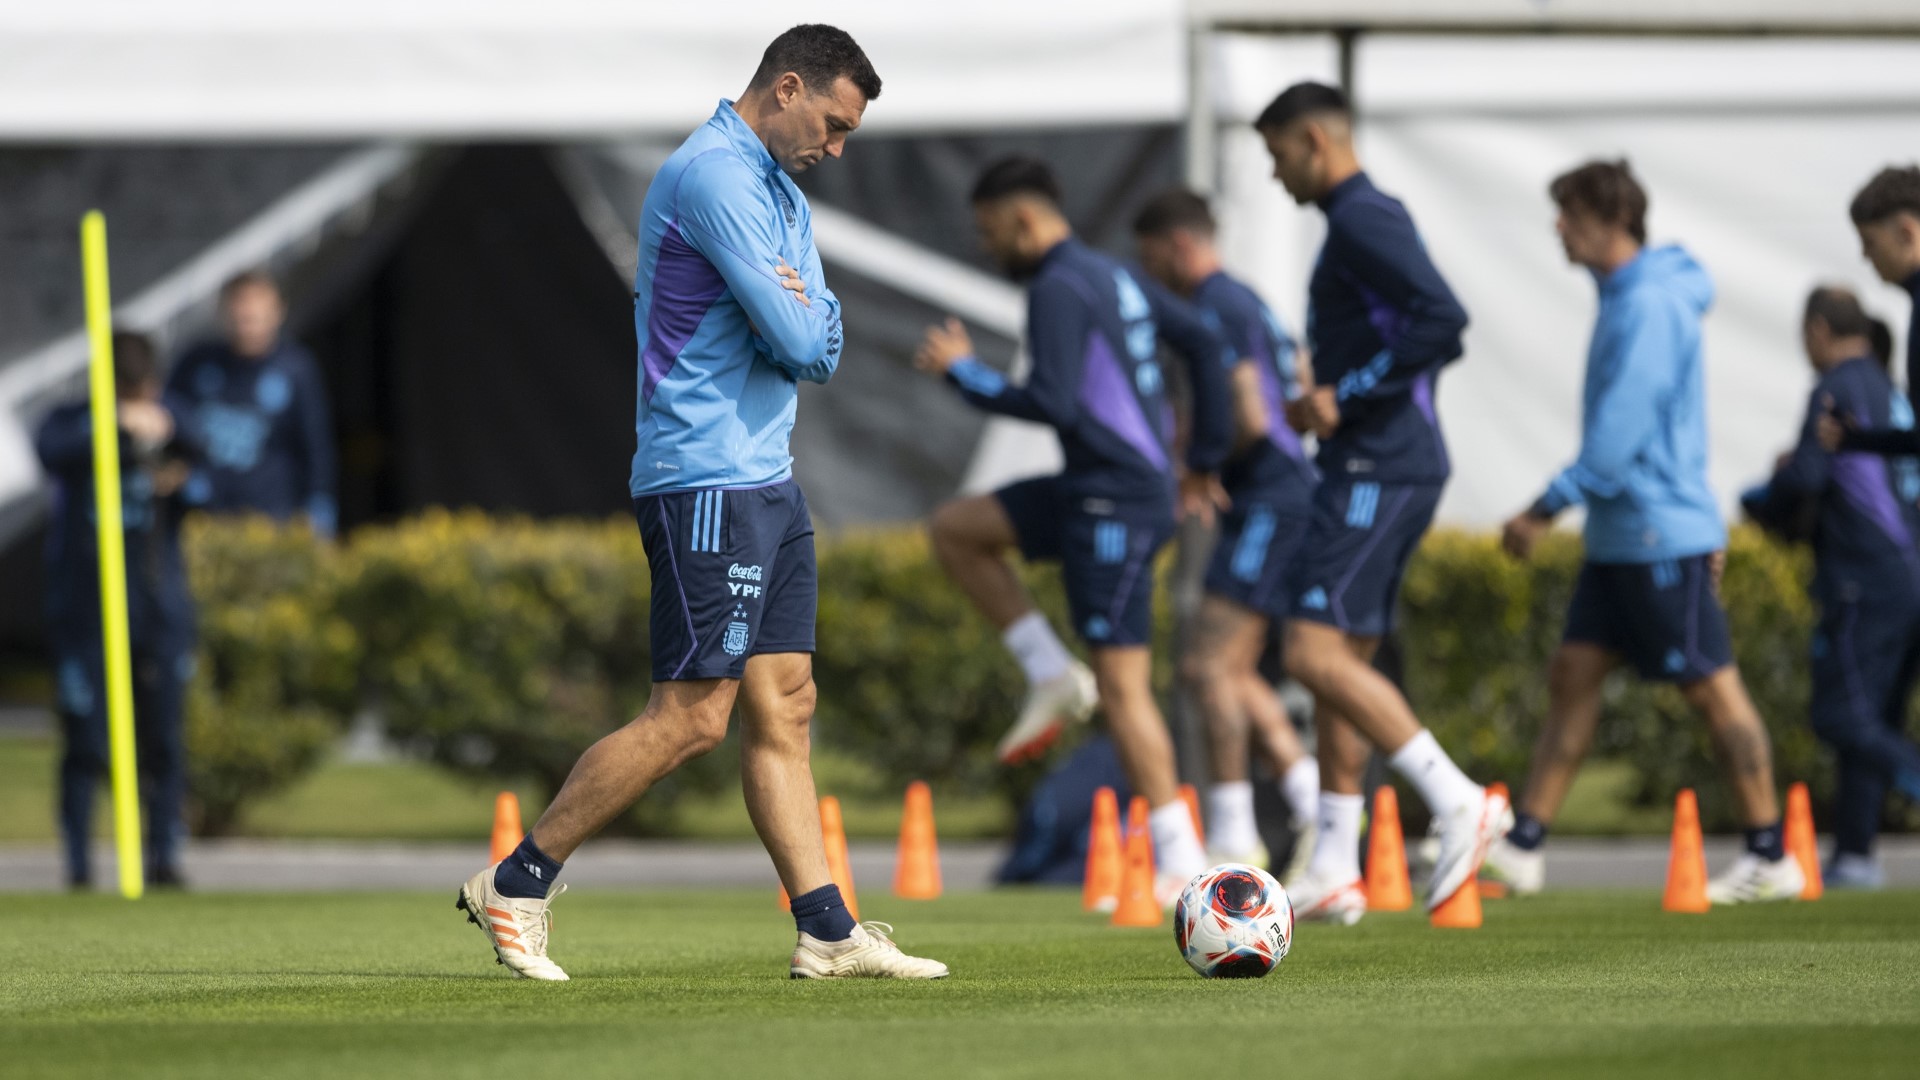 With Messi on the bench, Argentina faces Bolivia looking for its second win